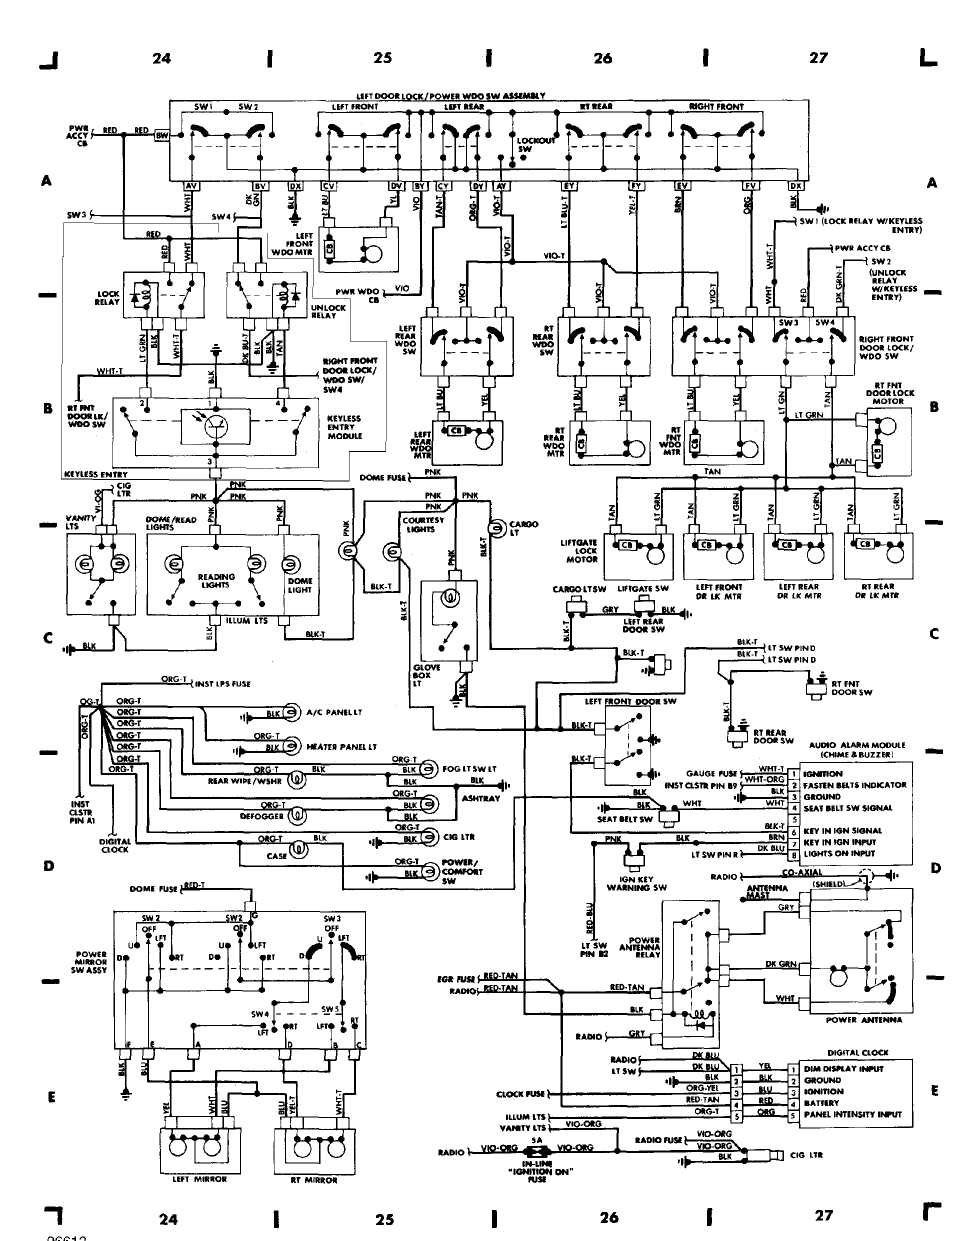 2000 Jeep Cherokee Ignition Switch Wiring Diagram